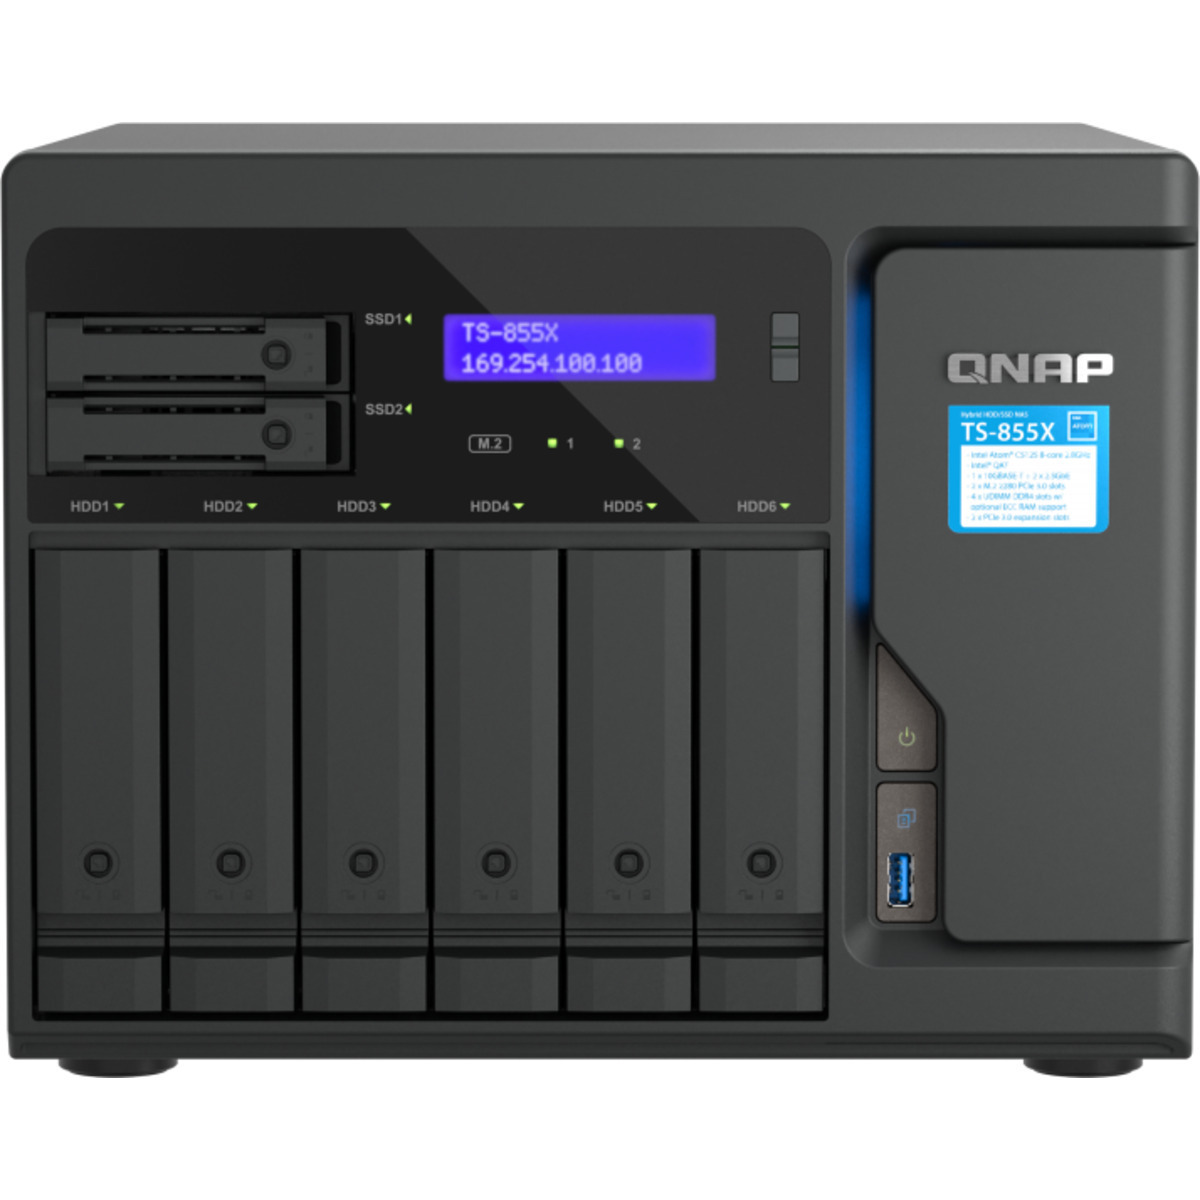 QNAP TS-855X 108tb 6+2-Bay Desktop Multimedia / Power User / Business NAS - Network Attached Storage Device 6x18tb Western Digital Red Pro WD181KFGX 3.5 7200rpm SATA 6Gb/s HDD NAS Class Drives Installed - Burn-In Tested - FREE RAM UPGRADE TS-855X